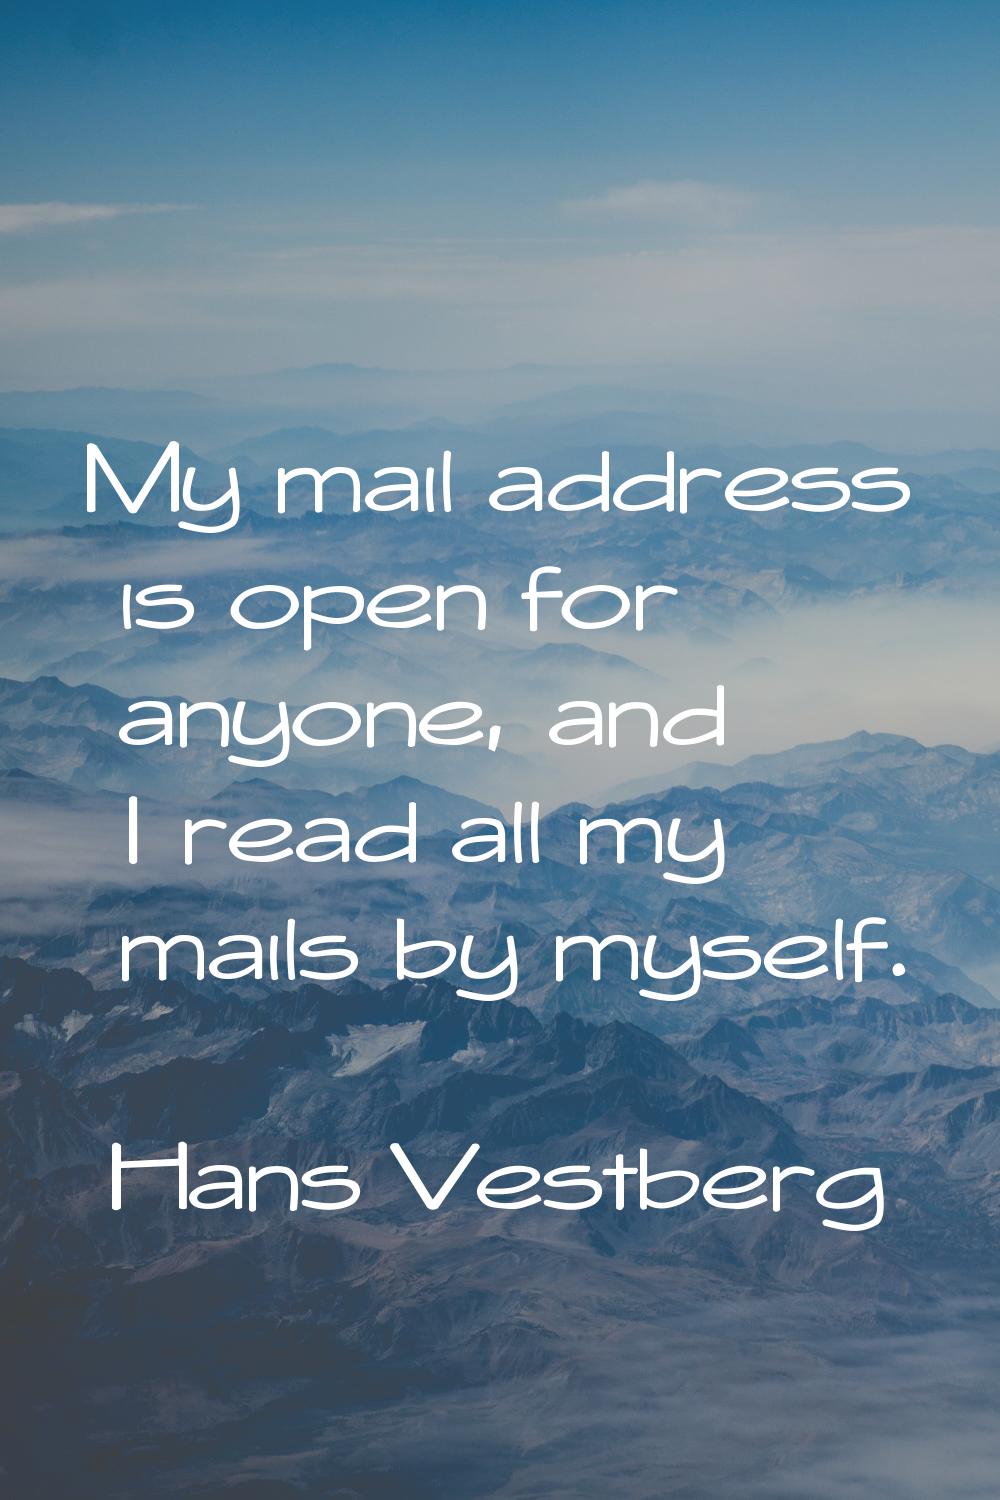 My mail address is open for anyone, and I read all my mails by myself.